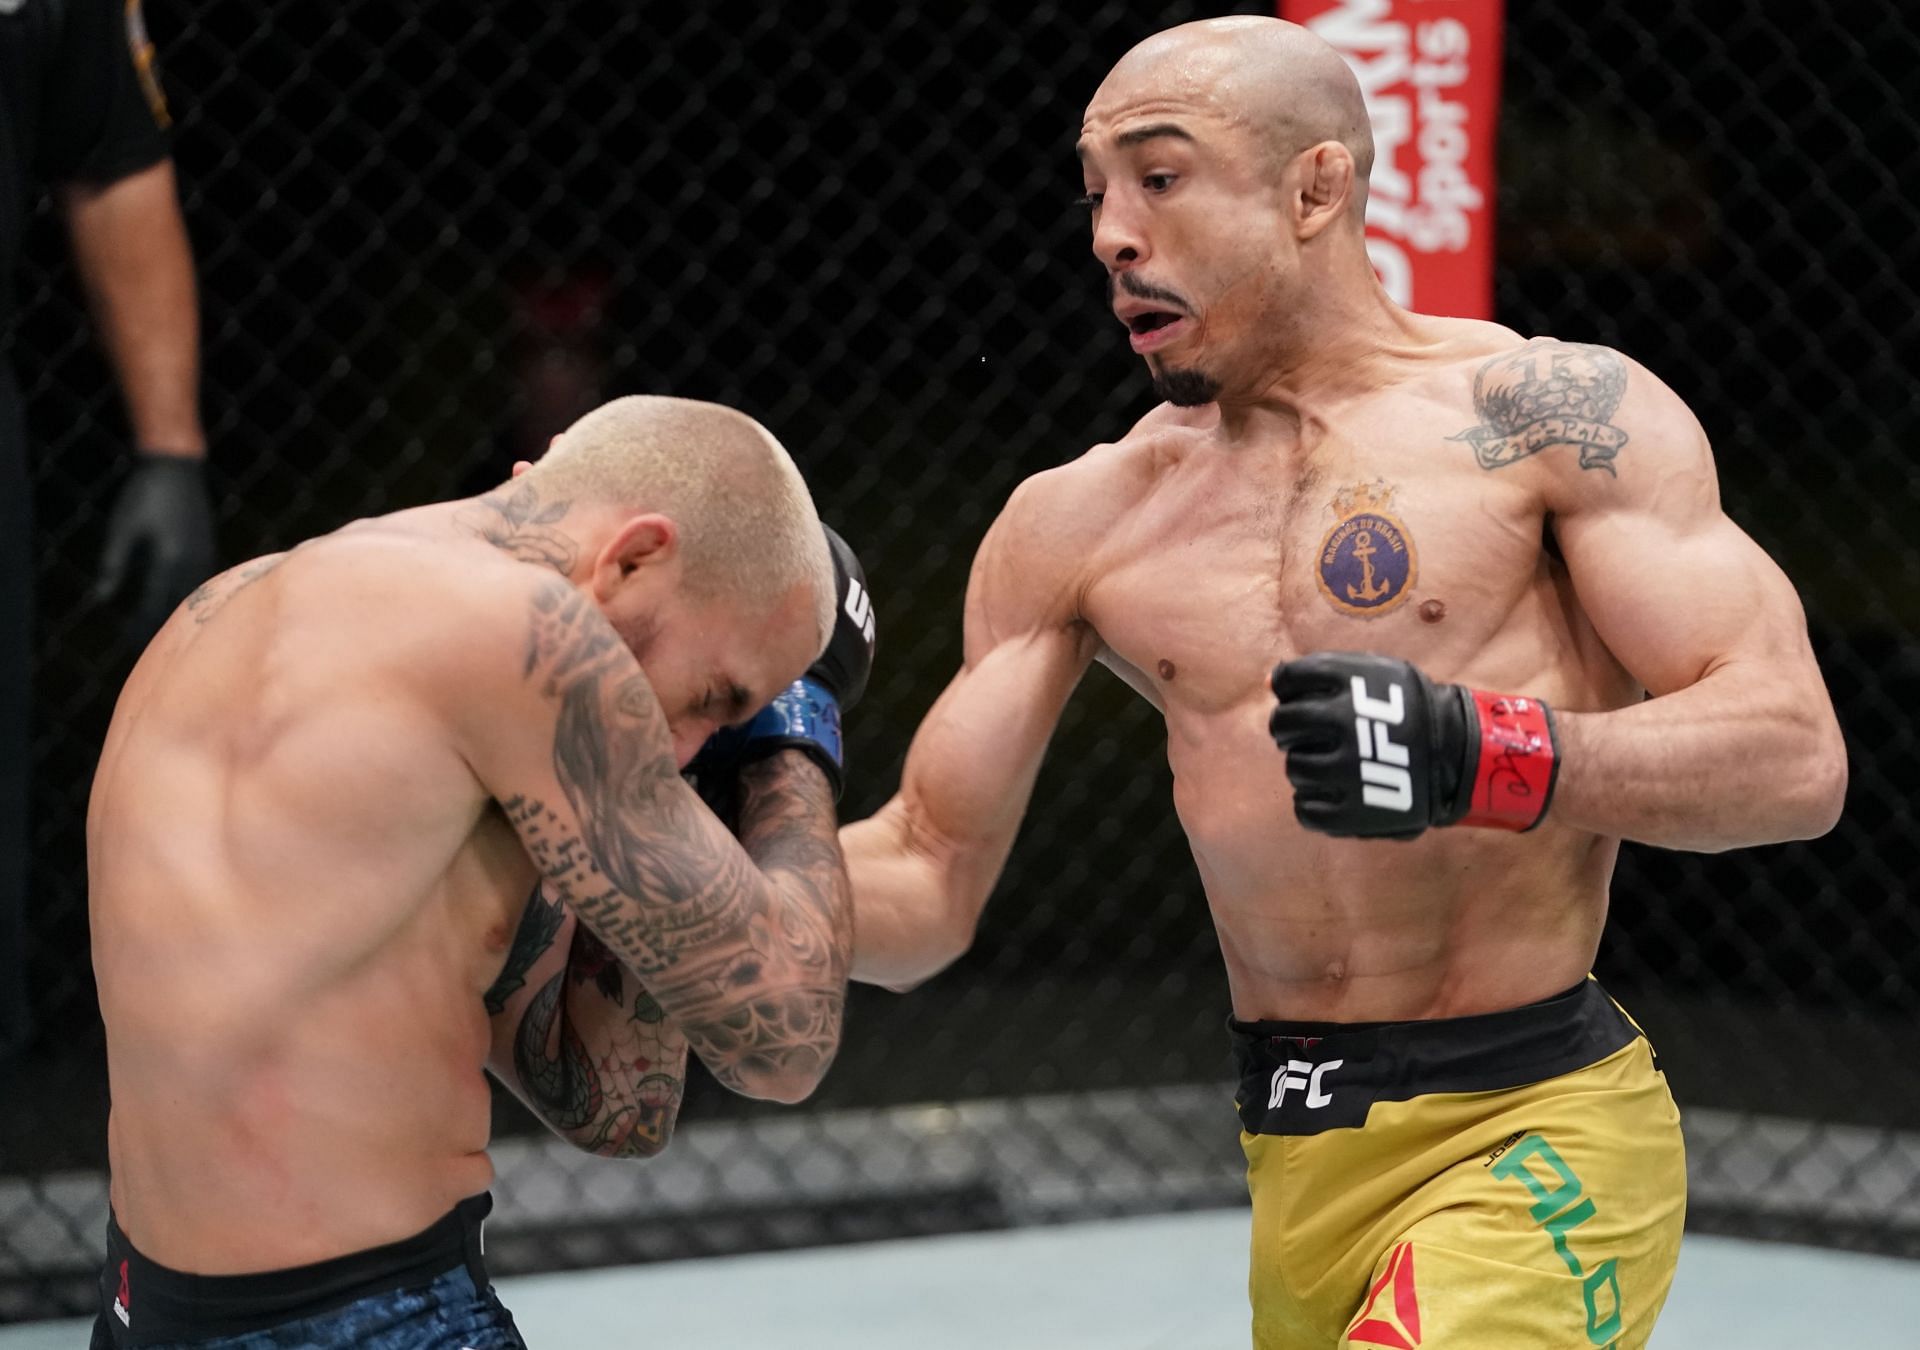 Jose Aldo has looked back to his best in his recent fights